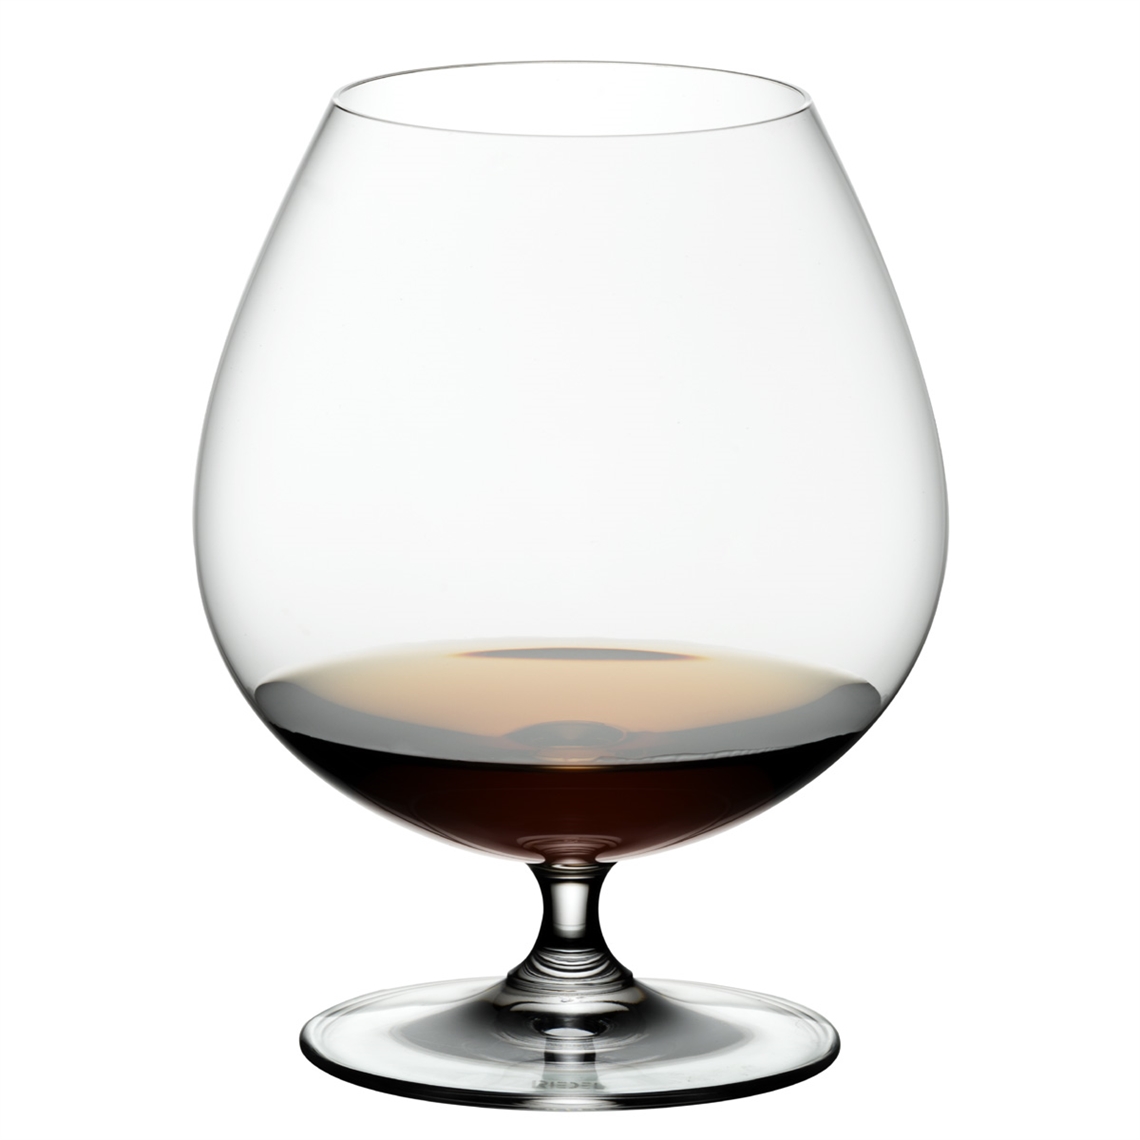 View more brandy / cognac glasses from our Spirit Glasses range